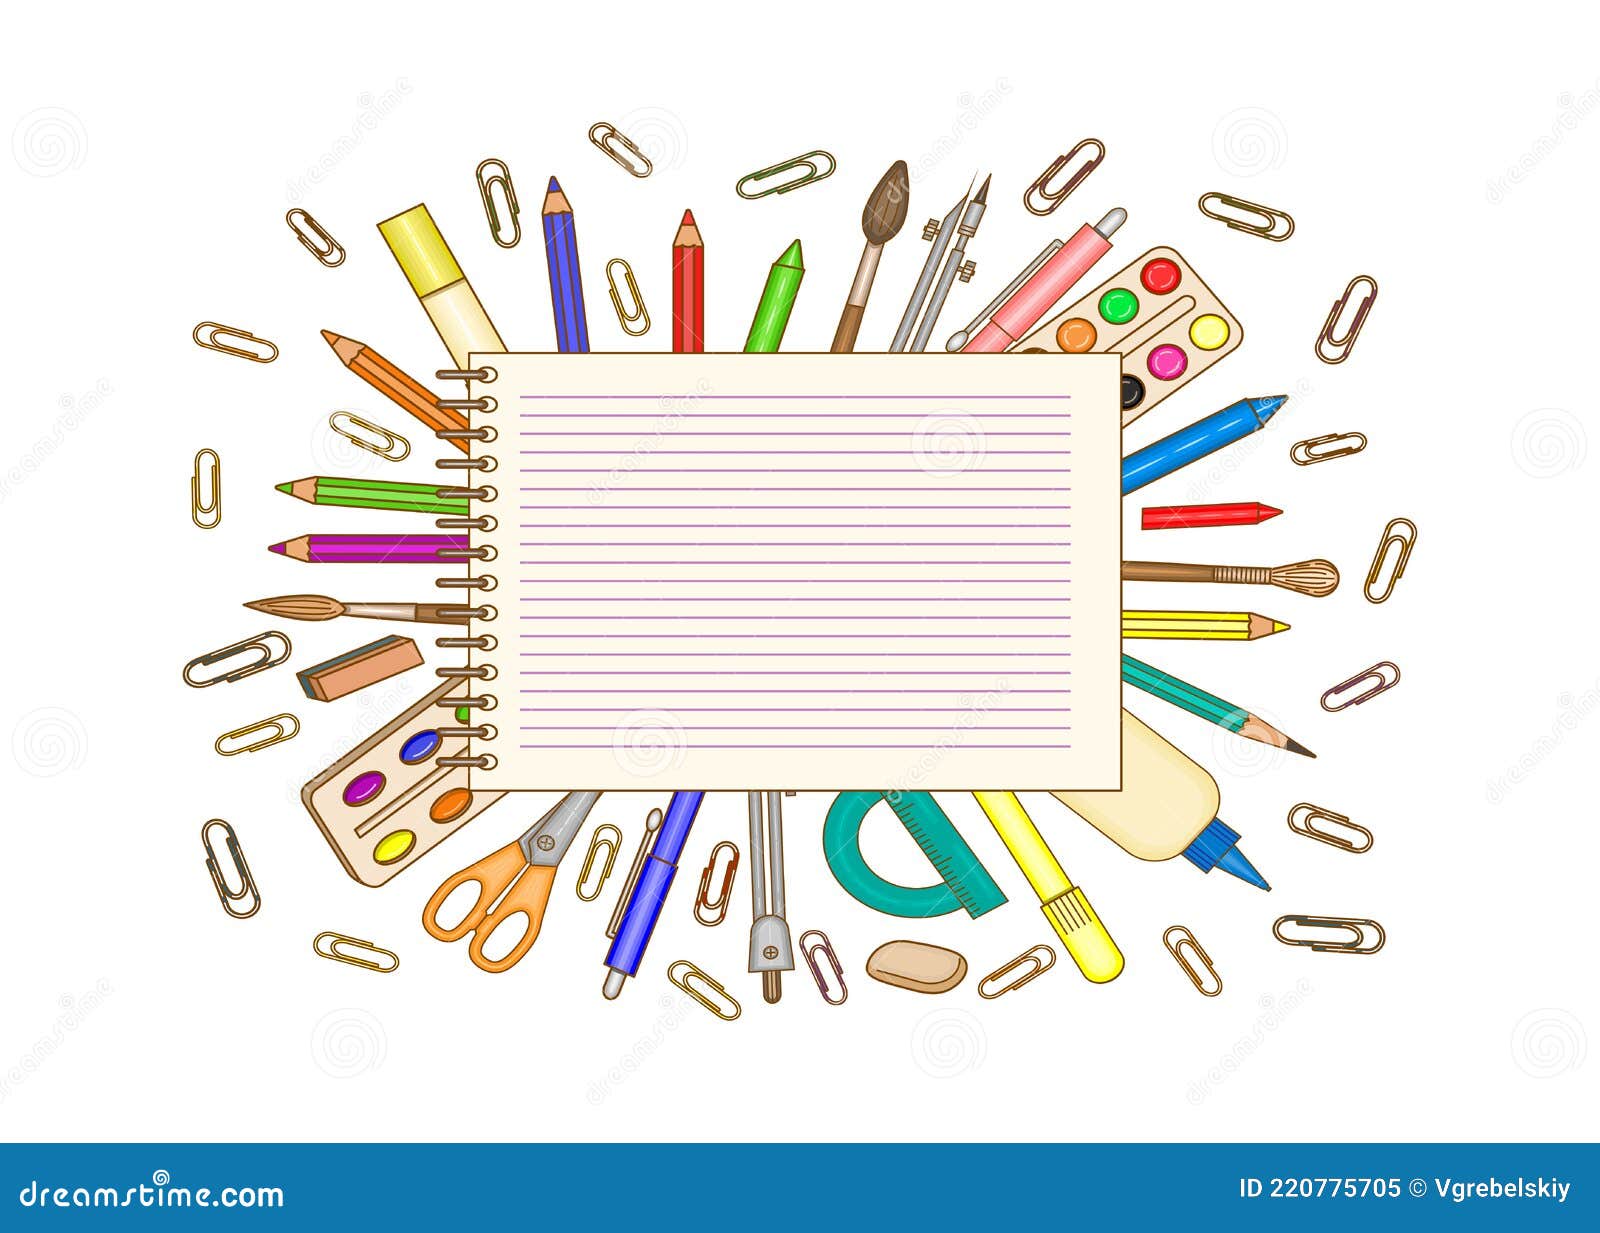 stationery-and-school-supplies-template-stock-vector-illustration-of